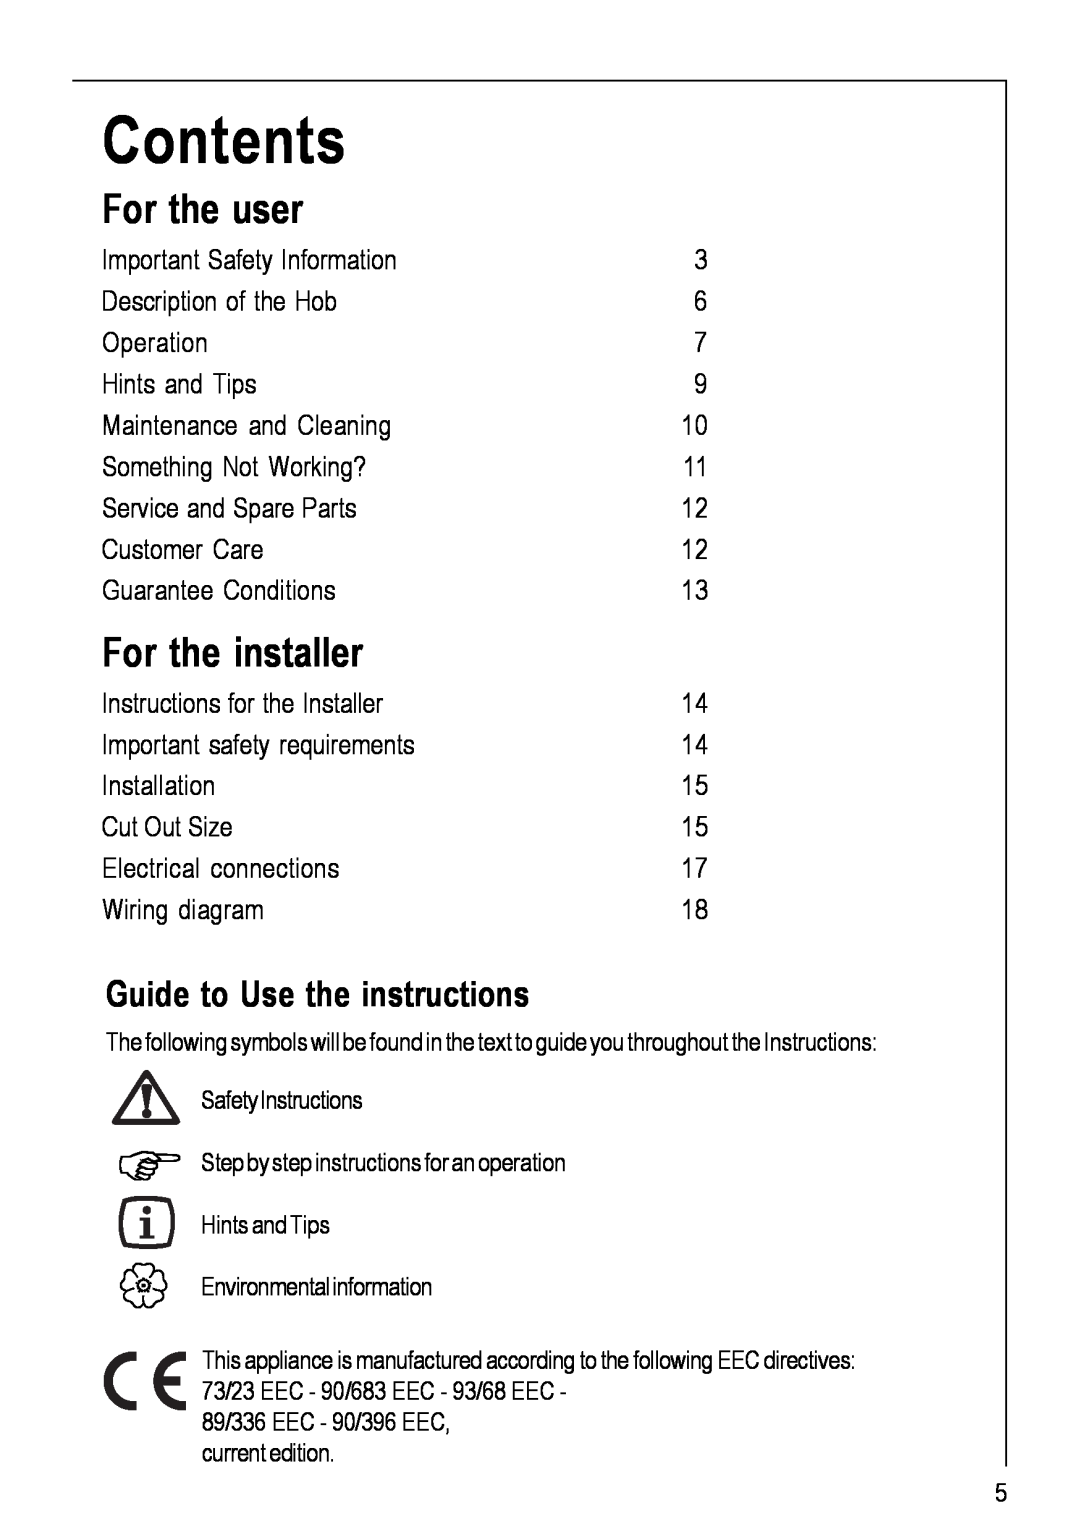 Electrolux 116 K operating instructions Contents, For the user, For the installer, Guide to Use the instructions 